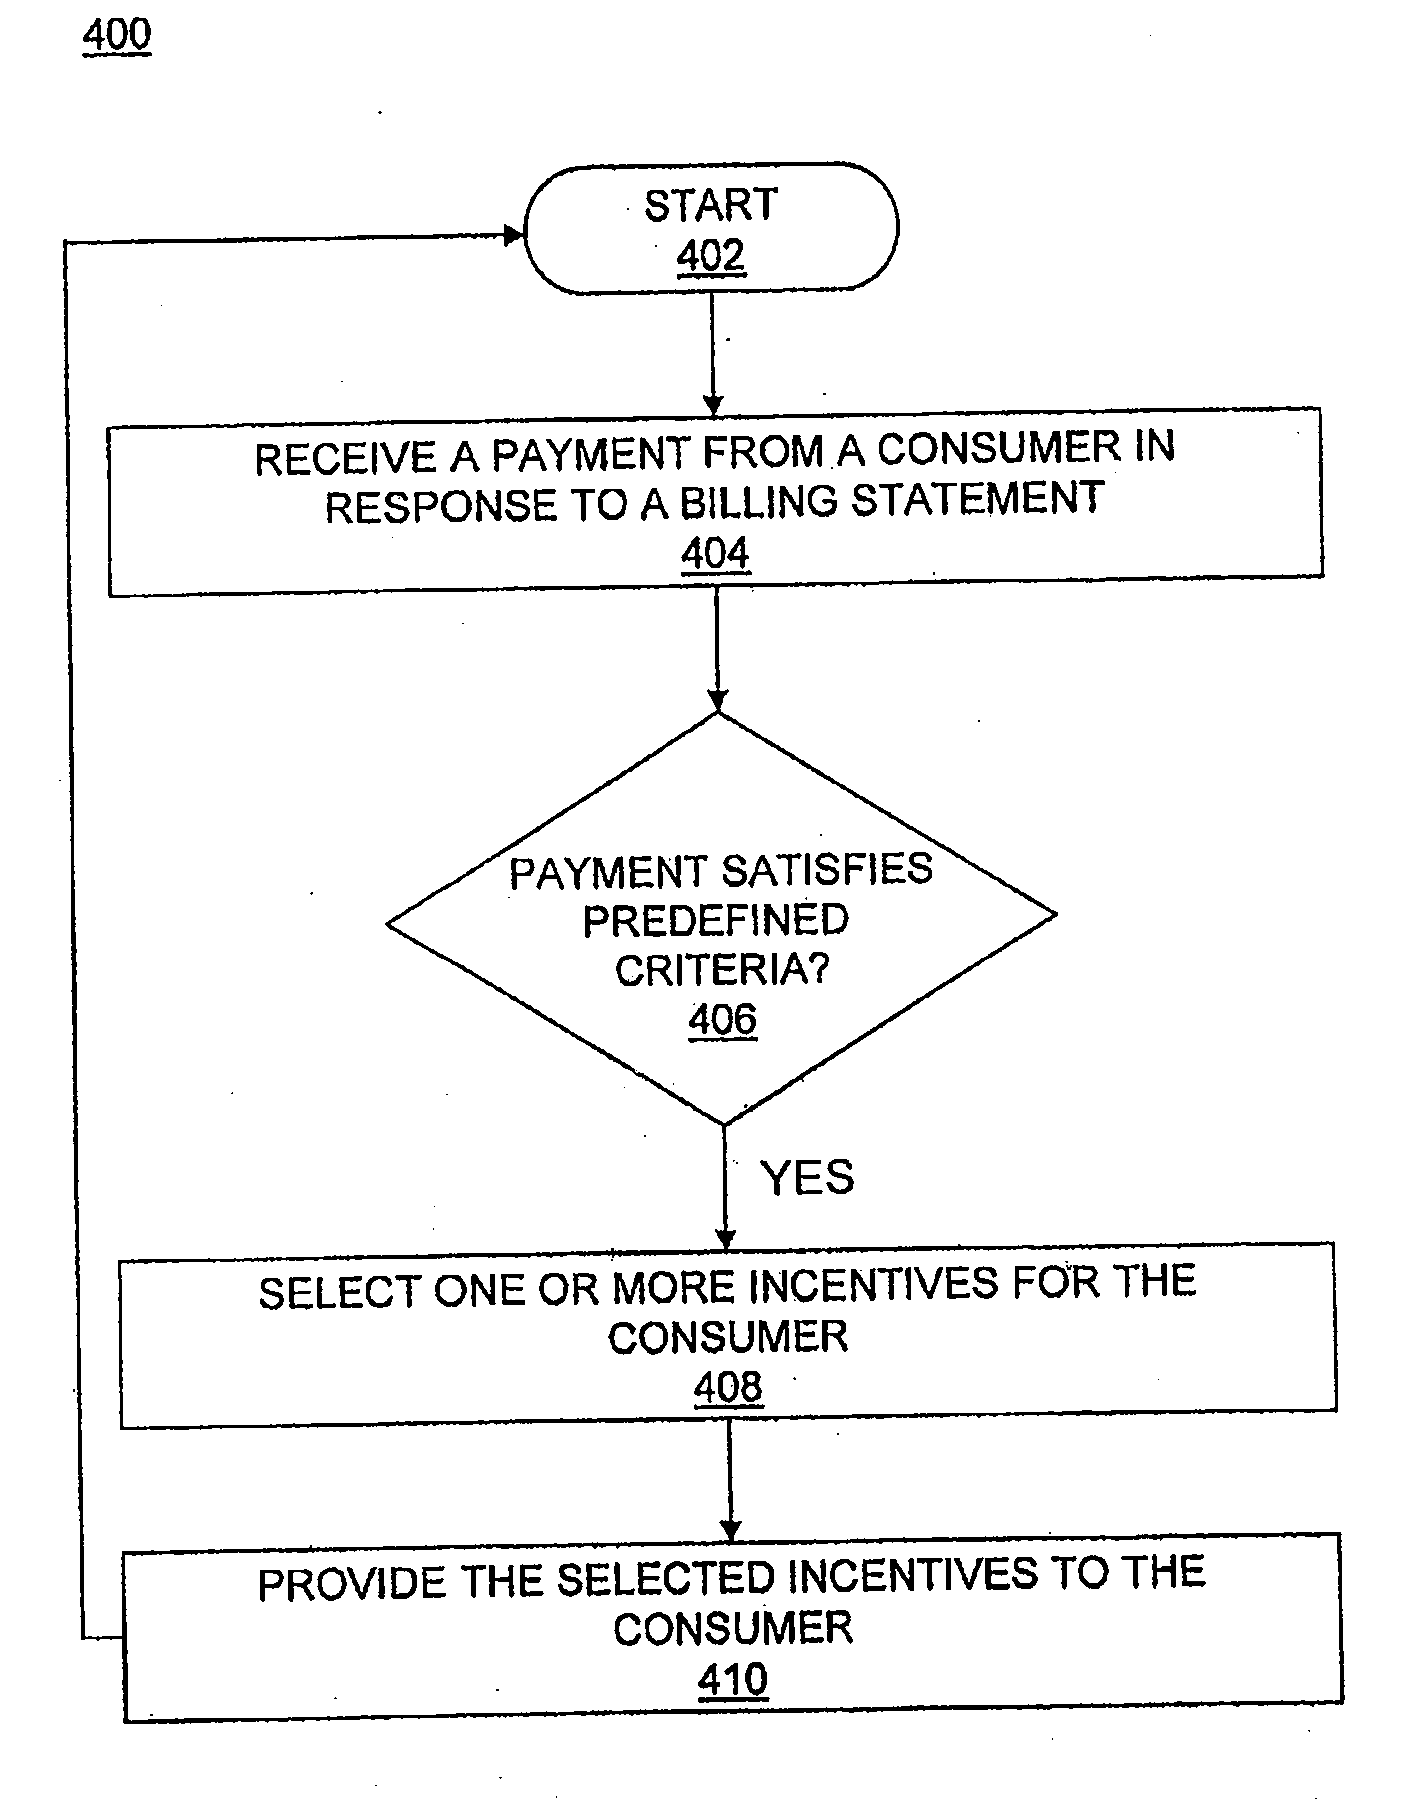 System and method for rewarding positive consumer behavior using loyalty point advances